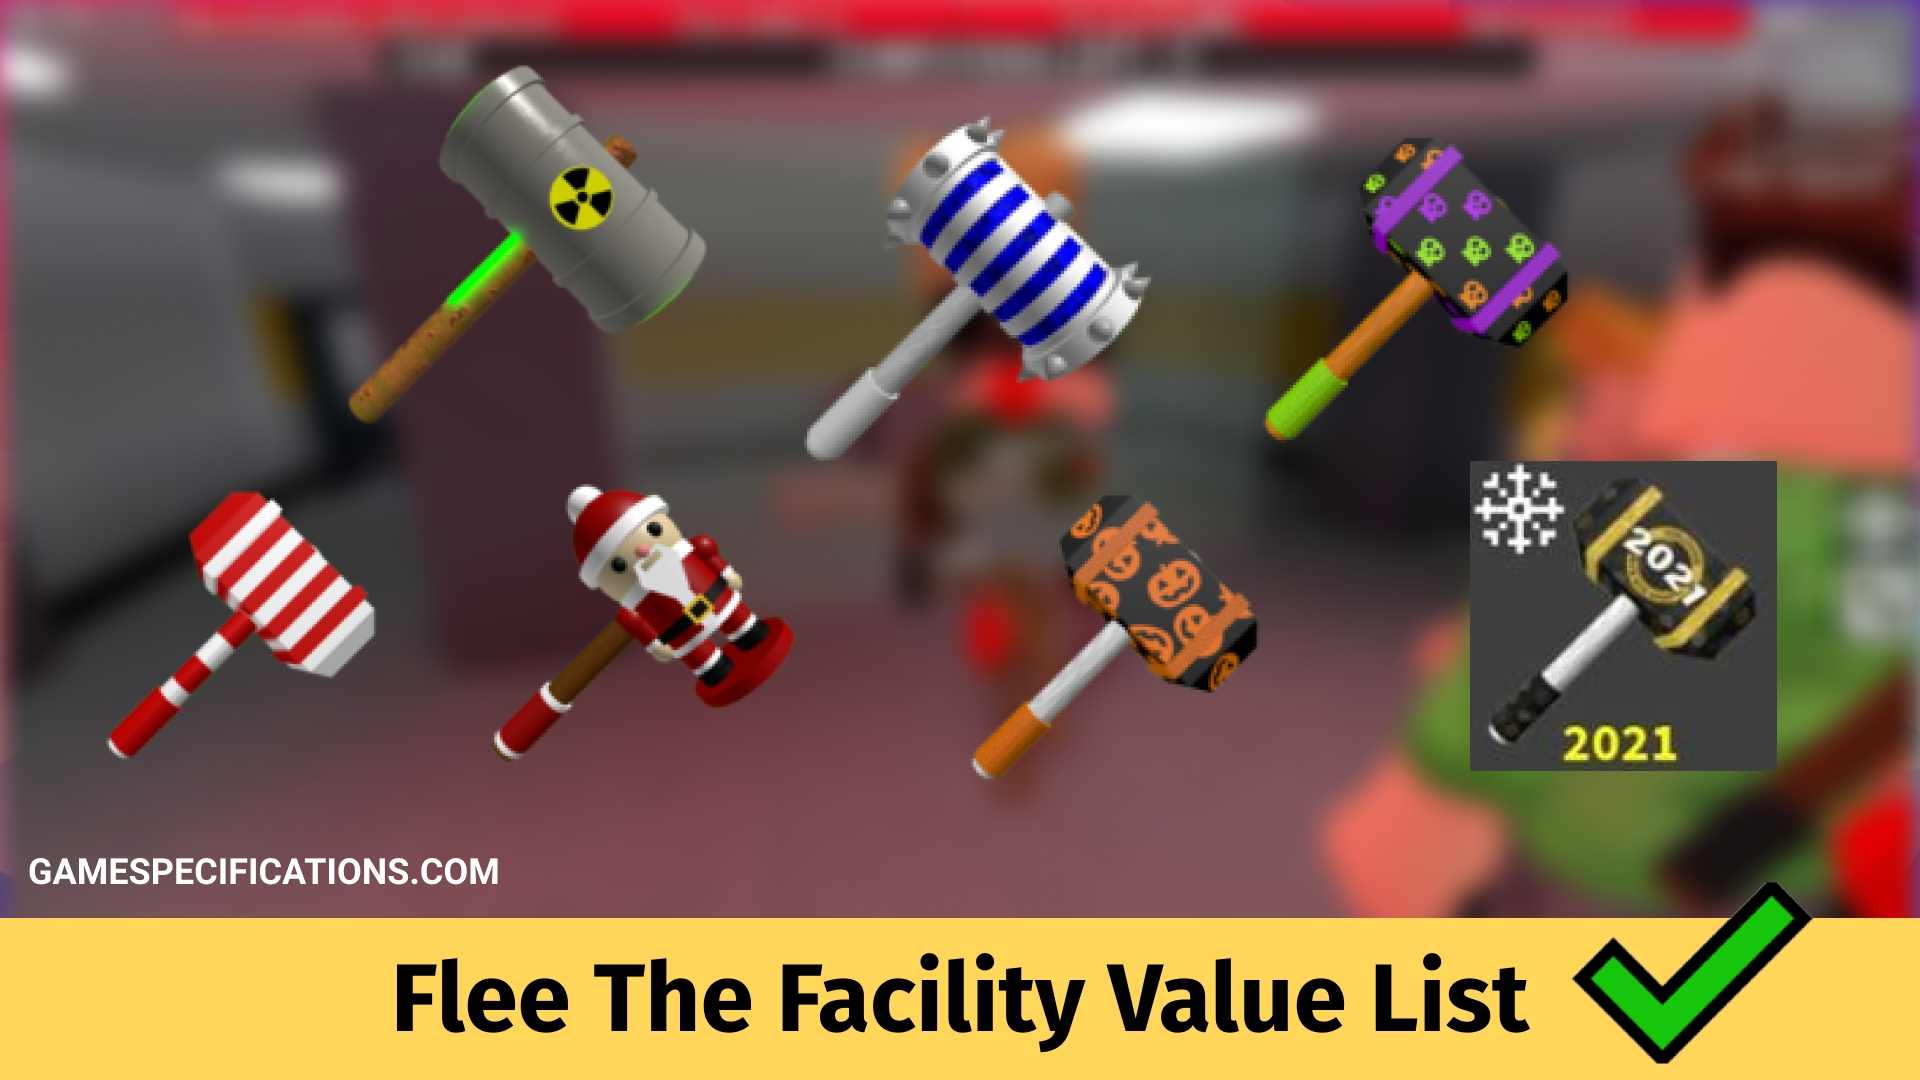 Flee The Facility Value List Of More Than 100 Items - Game